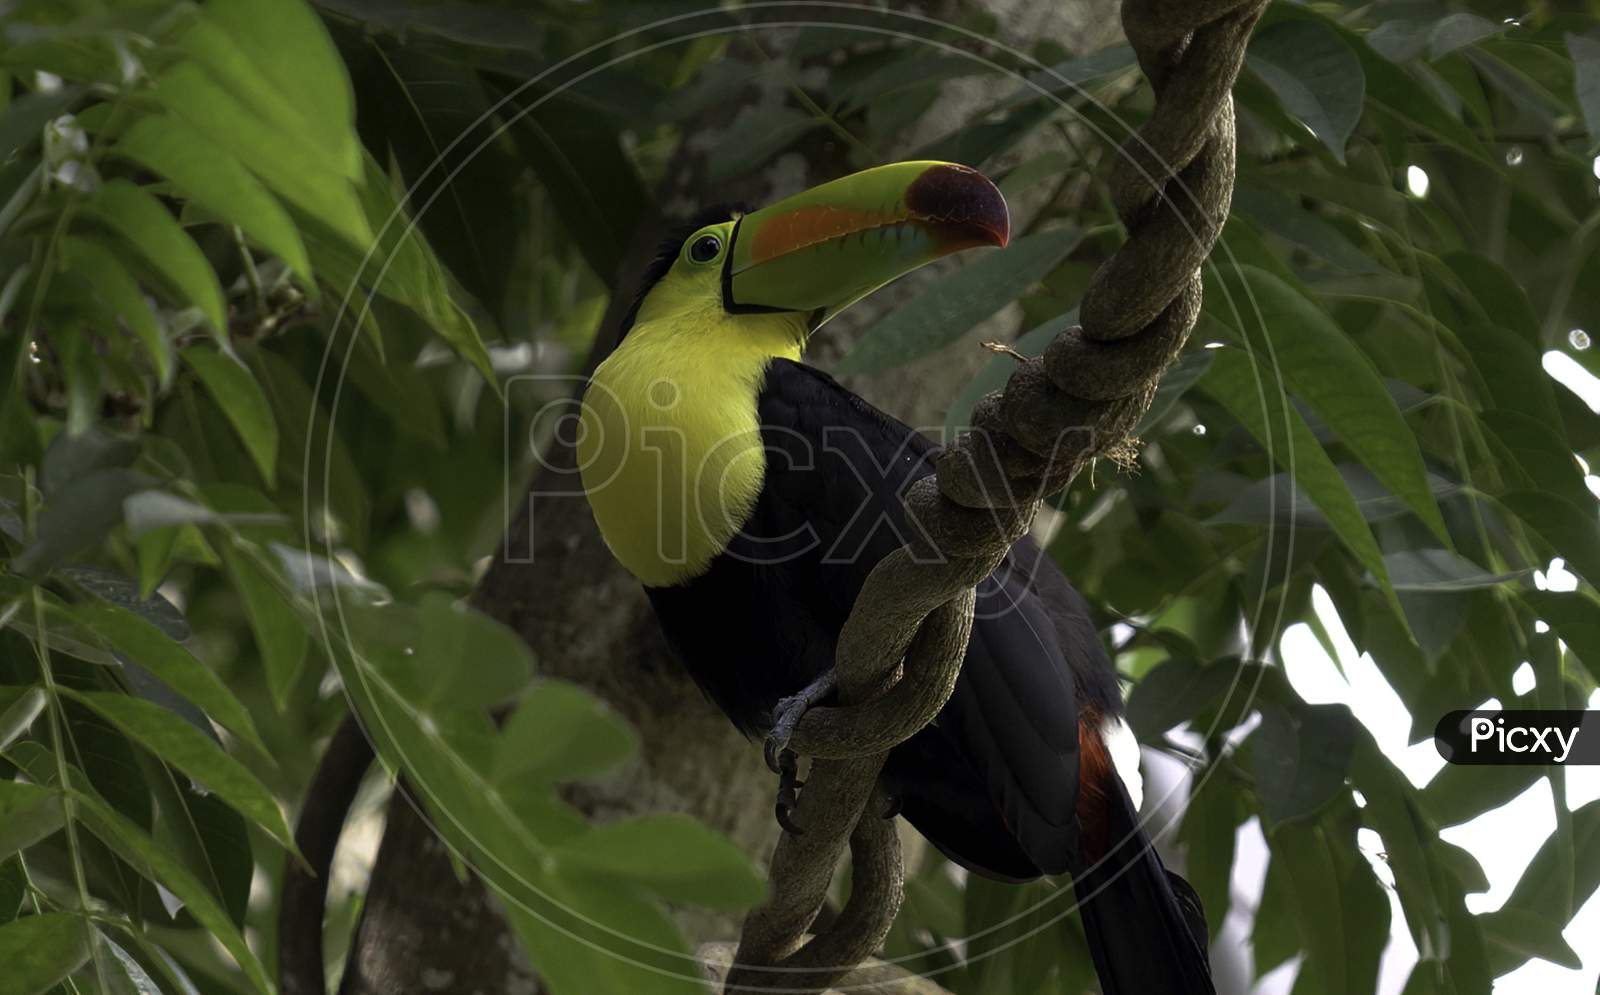 Keel-billed Toucan, Ramphastos sulfuratus, bird with big bill sitting on the branch in the forest, Boca Tapada, green vegetation, Costa Rica. Nature travel in central America.